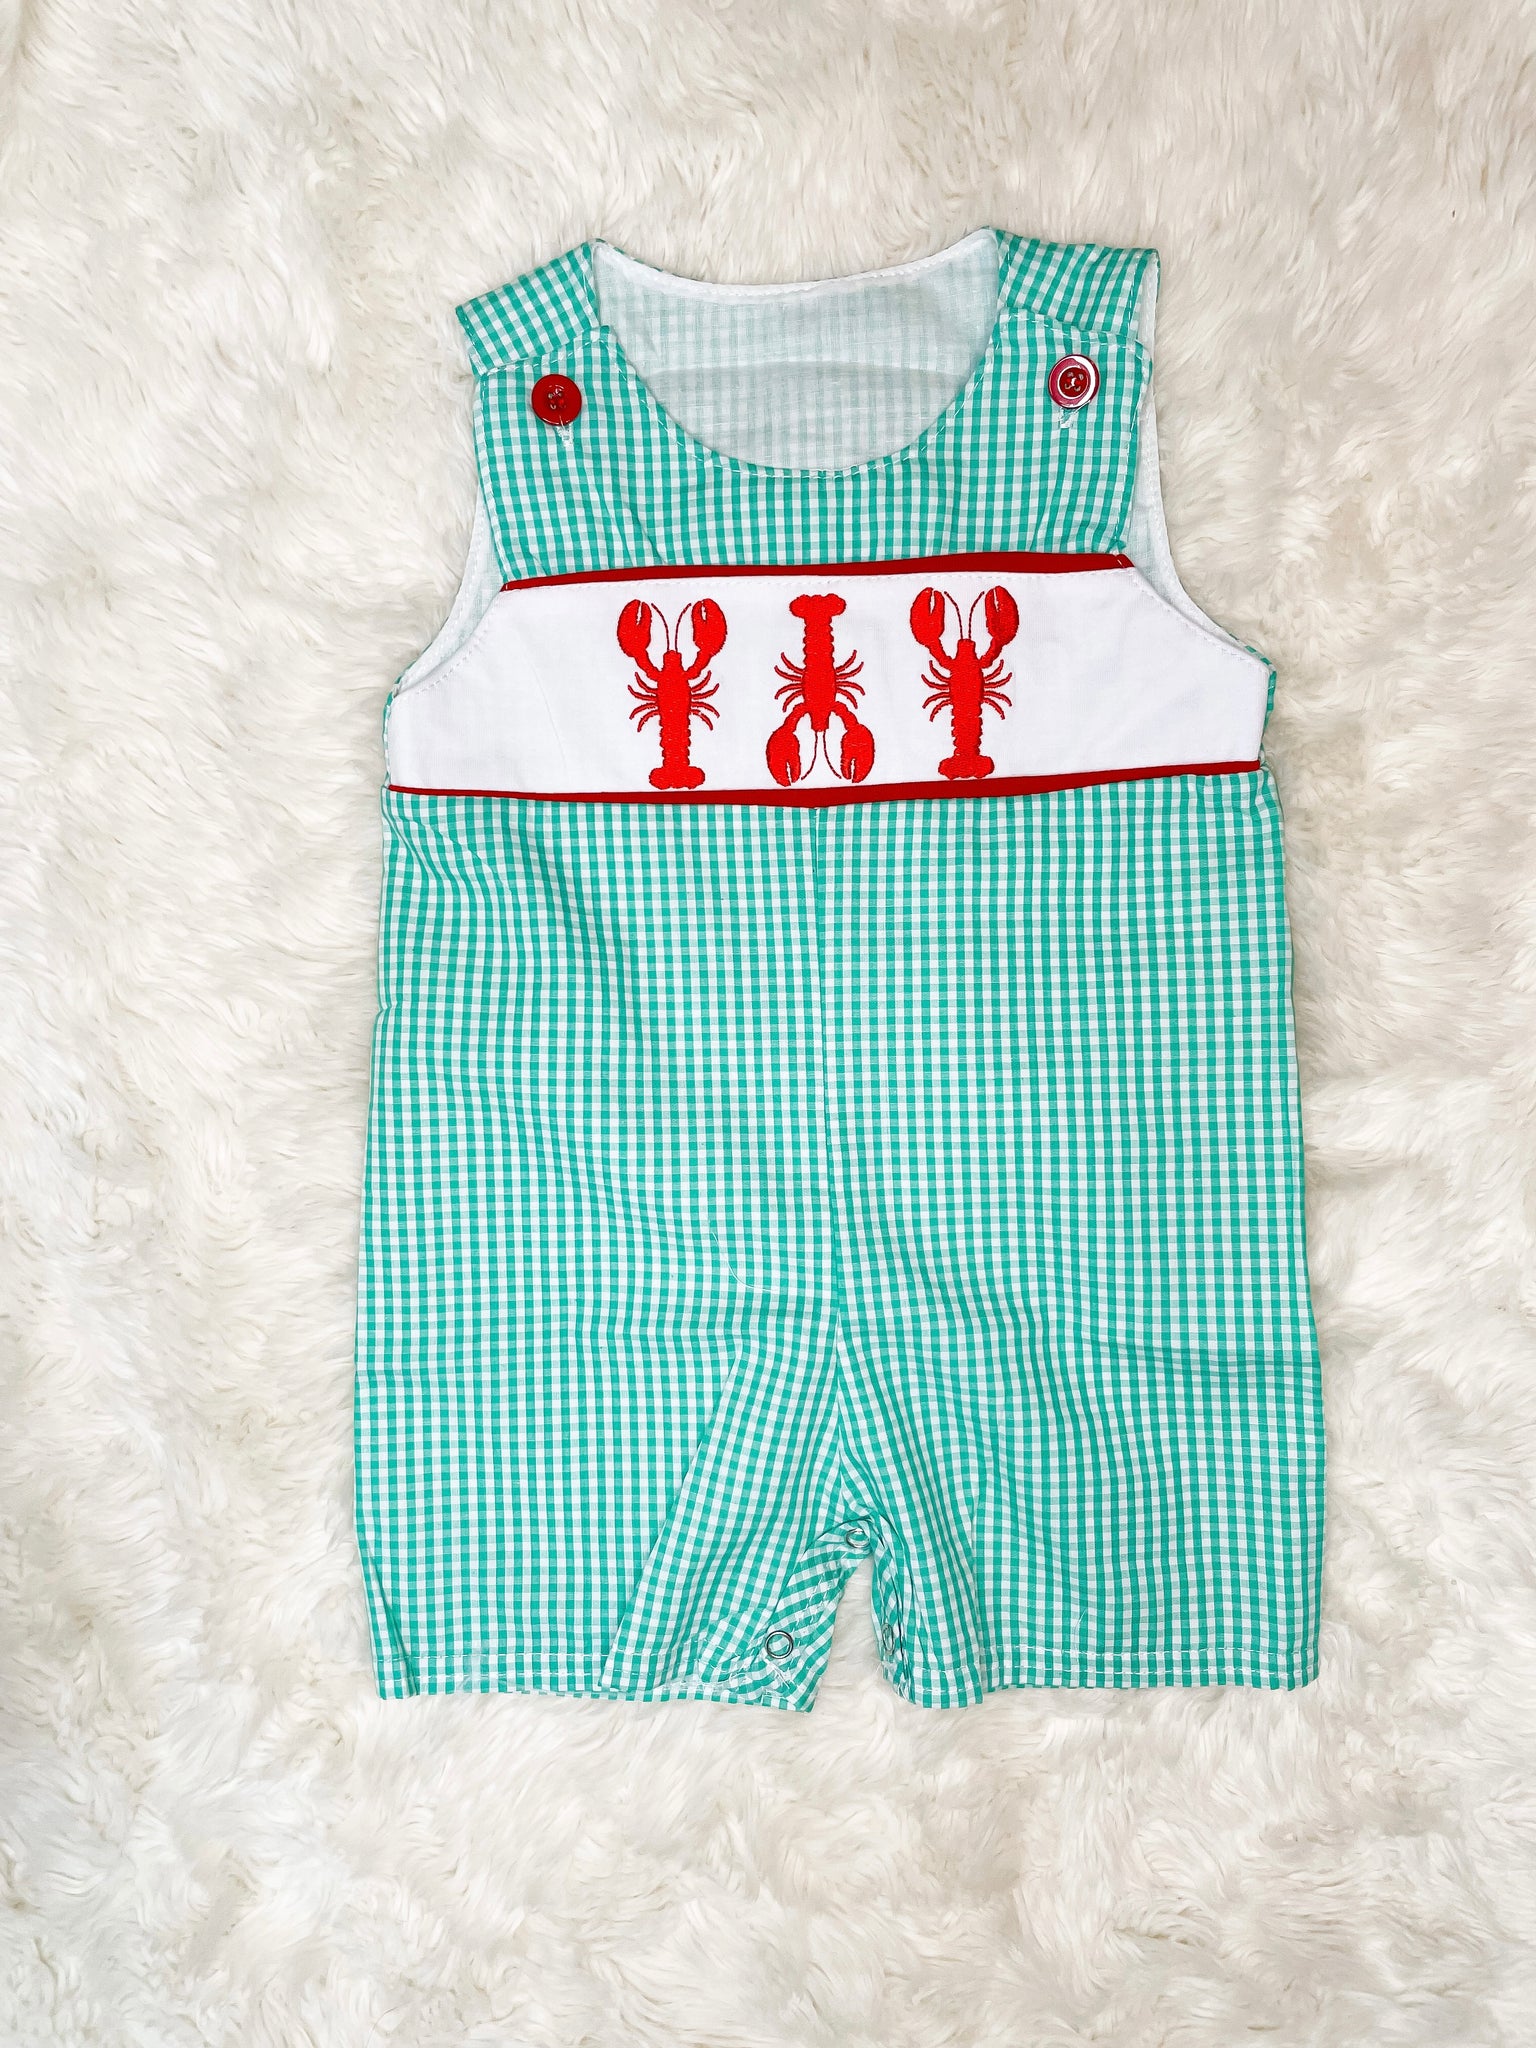 Boys Teal/Red Crawfish Embroidery Romper